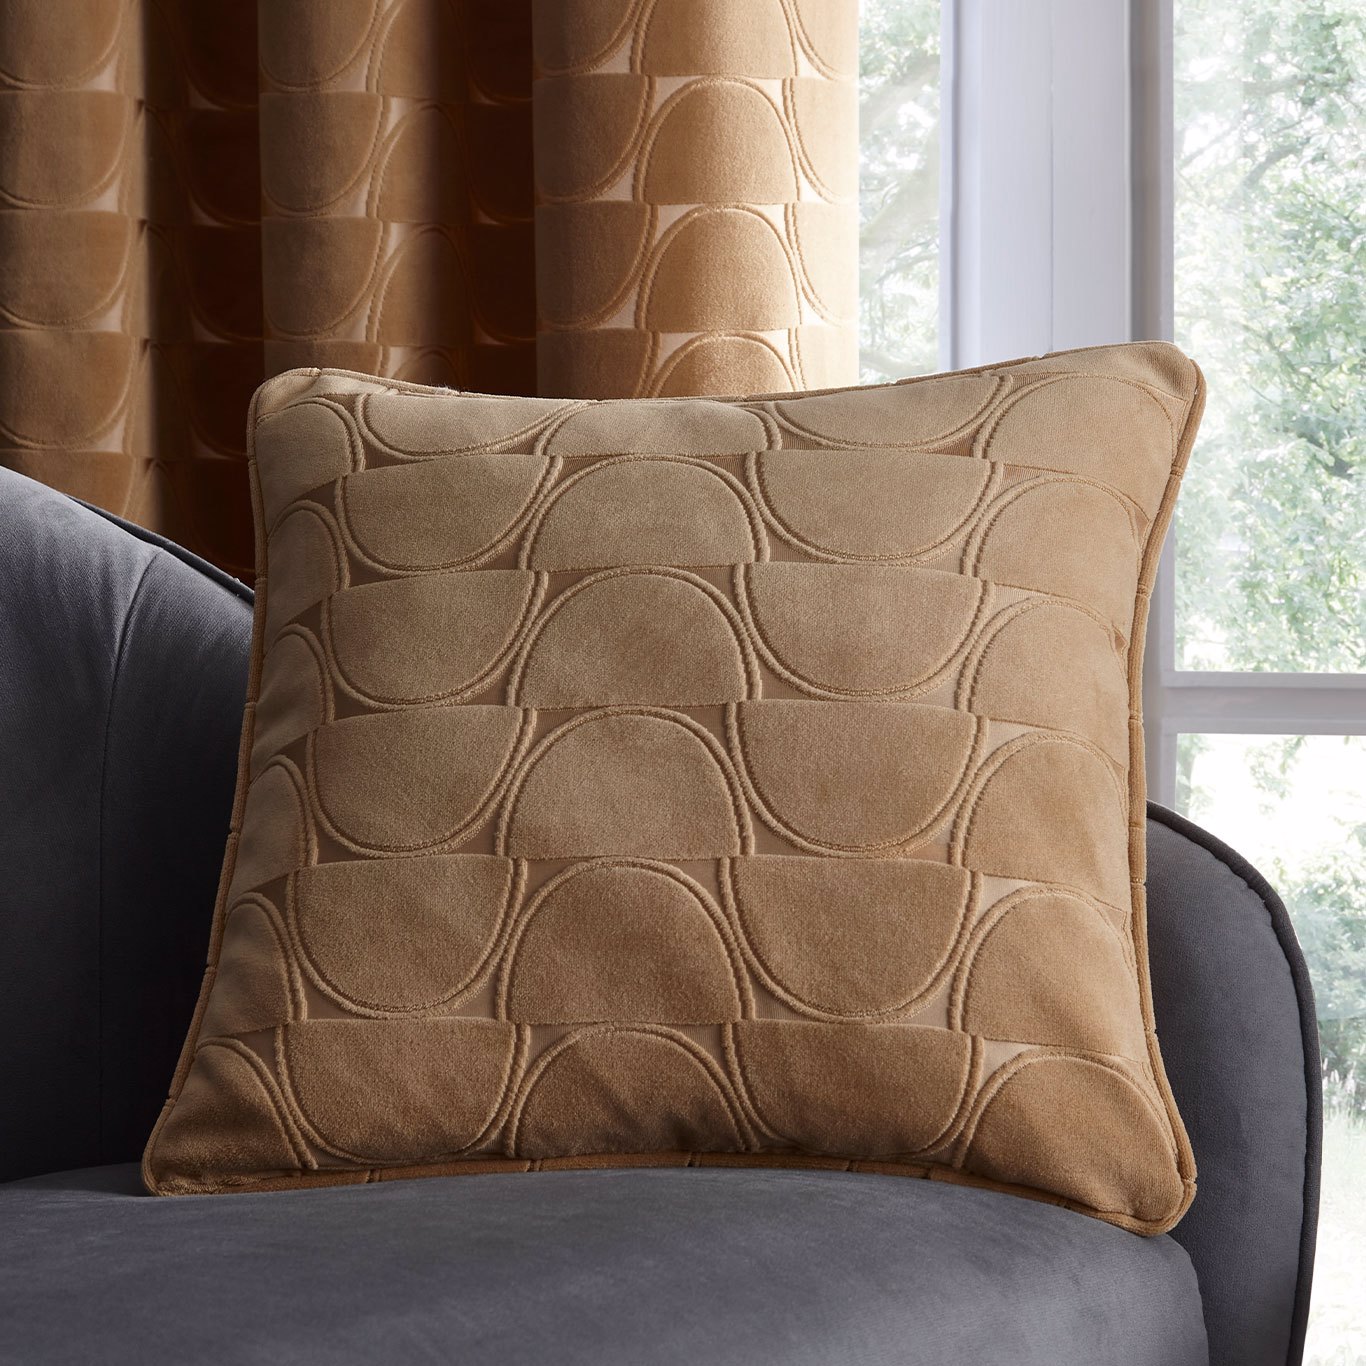 Lucca Ochre Cushions by CNC